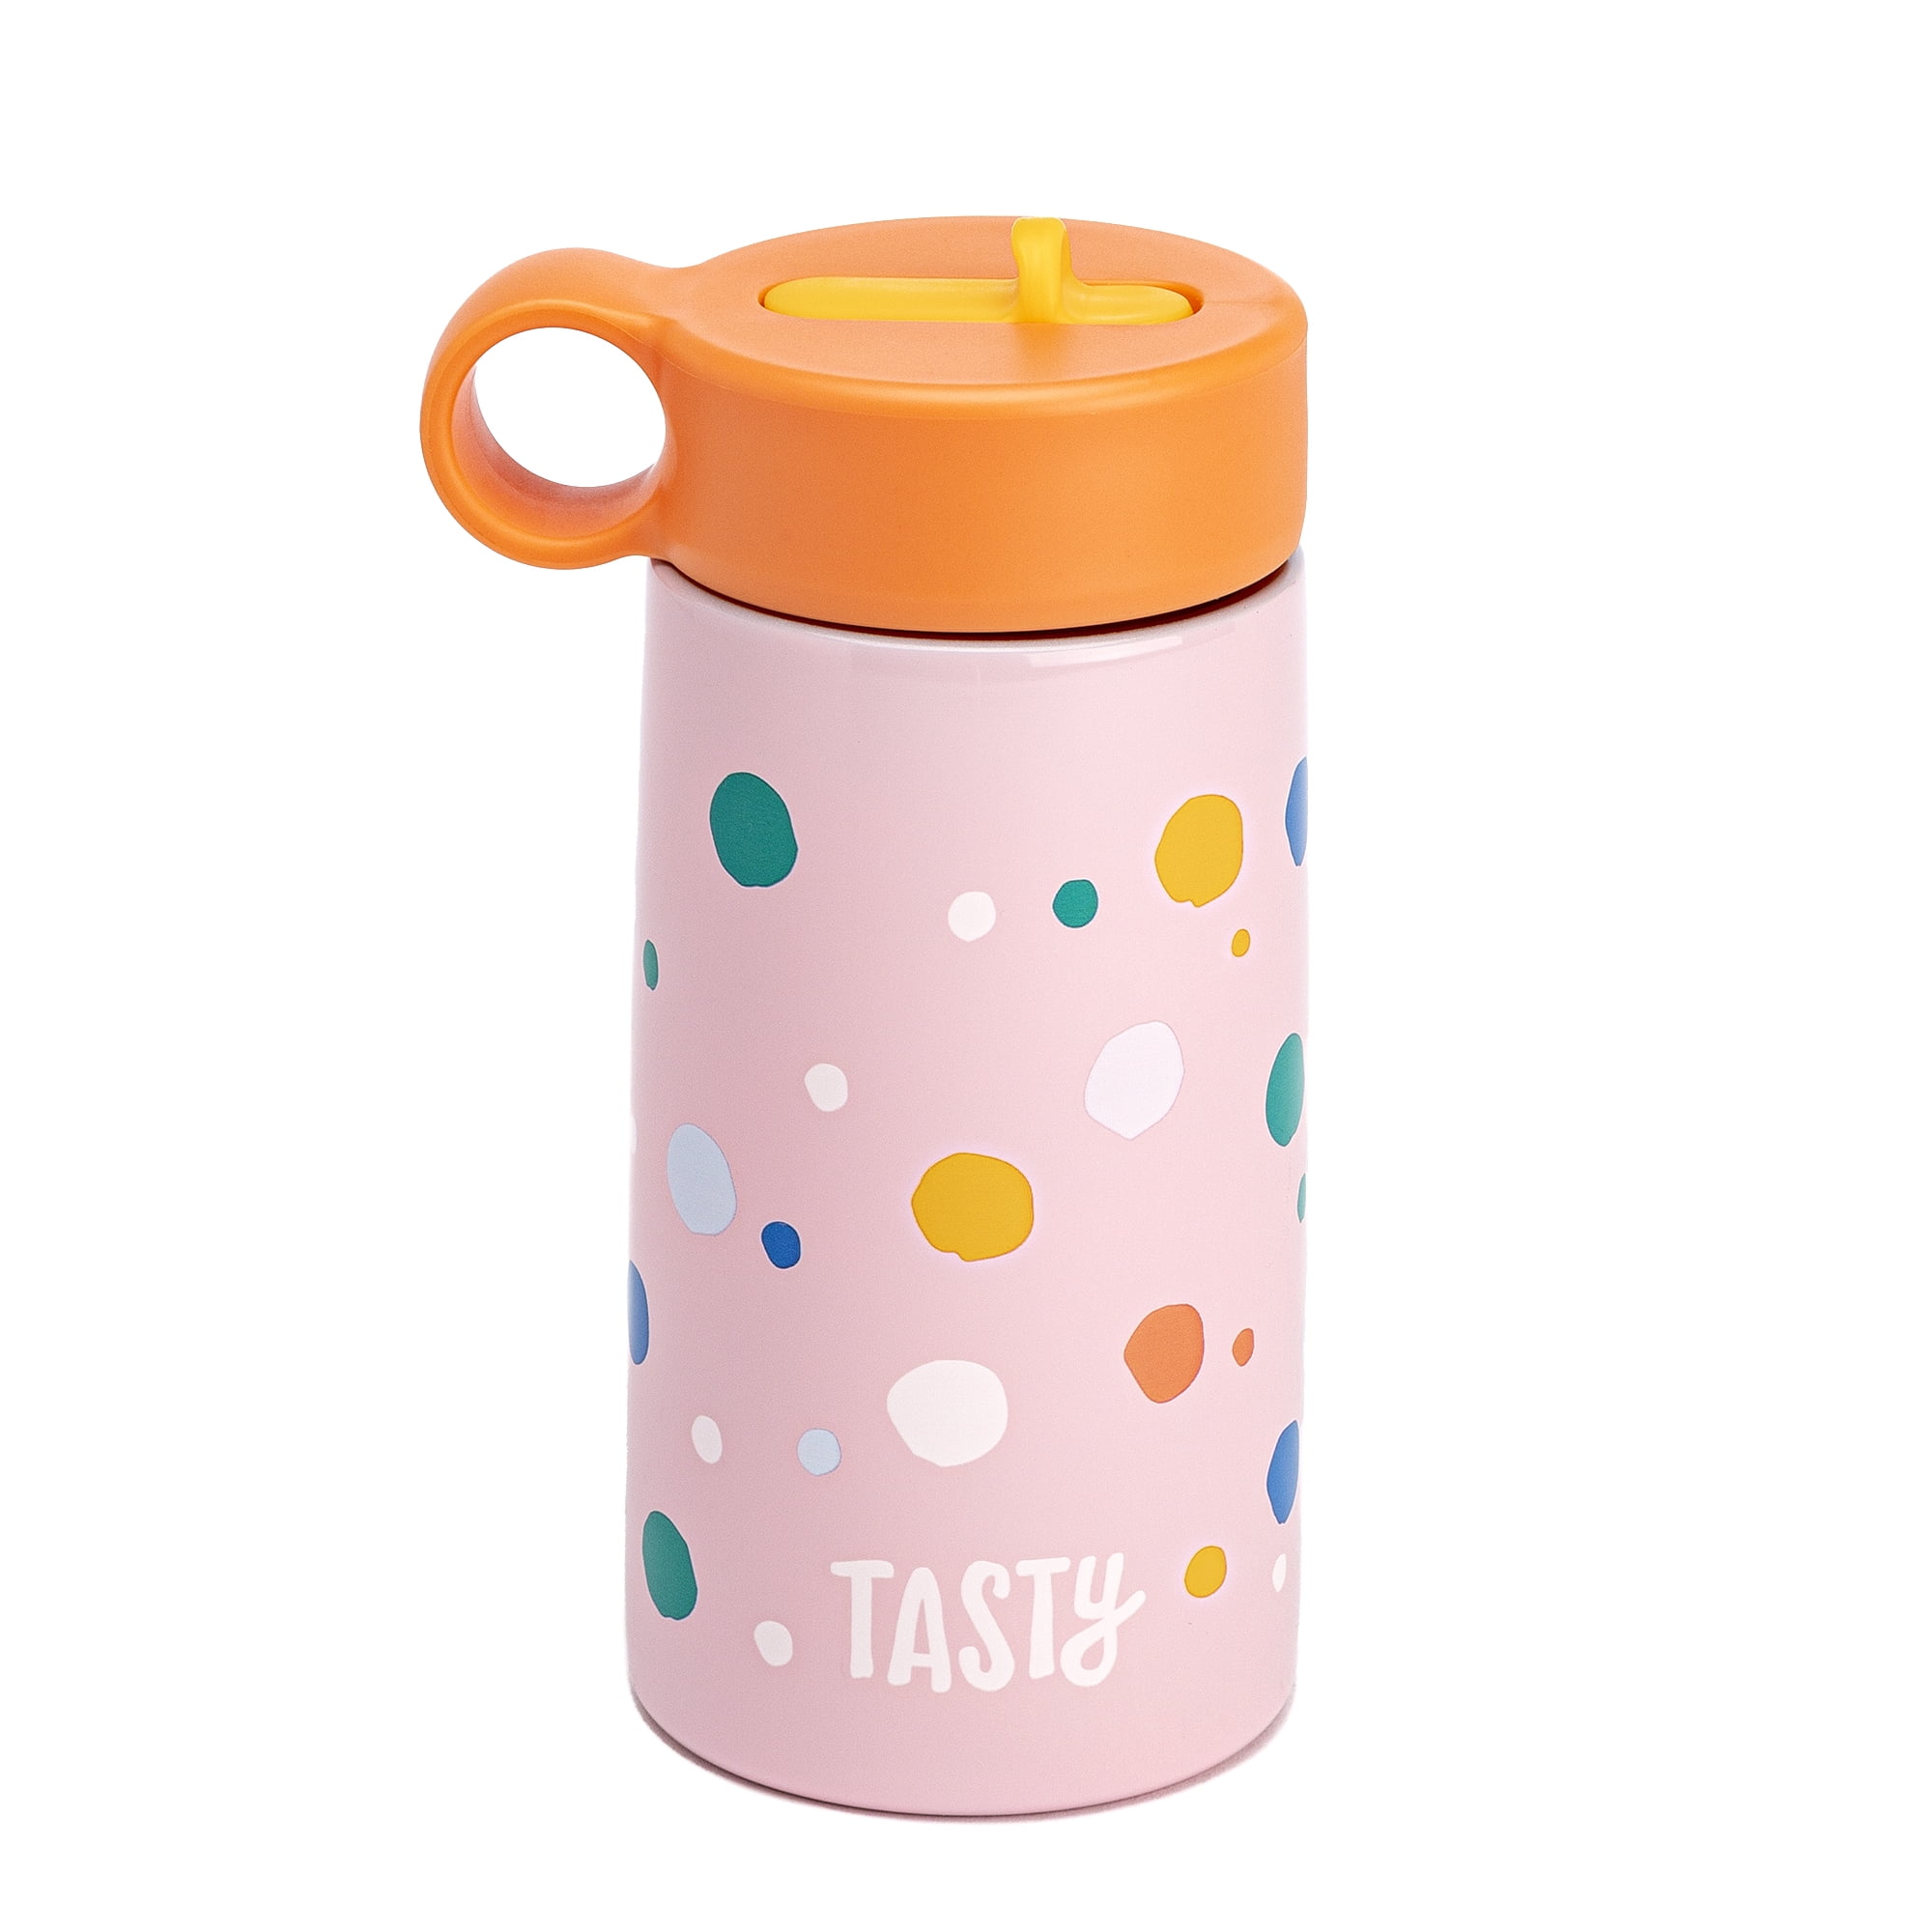 Tasty Kids 2 in 1 Double Wall Stainless Steel Thermos Bottle,14 Ounces,  Pink Polka Dot